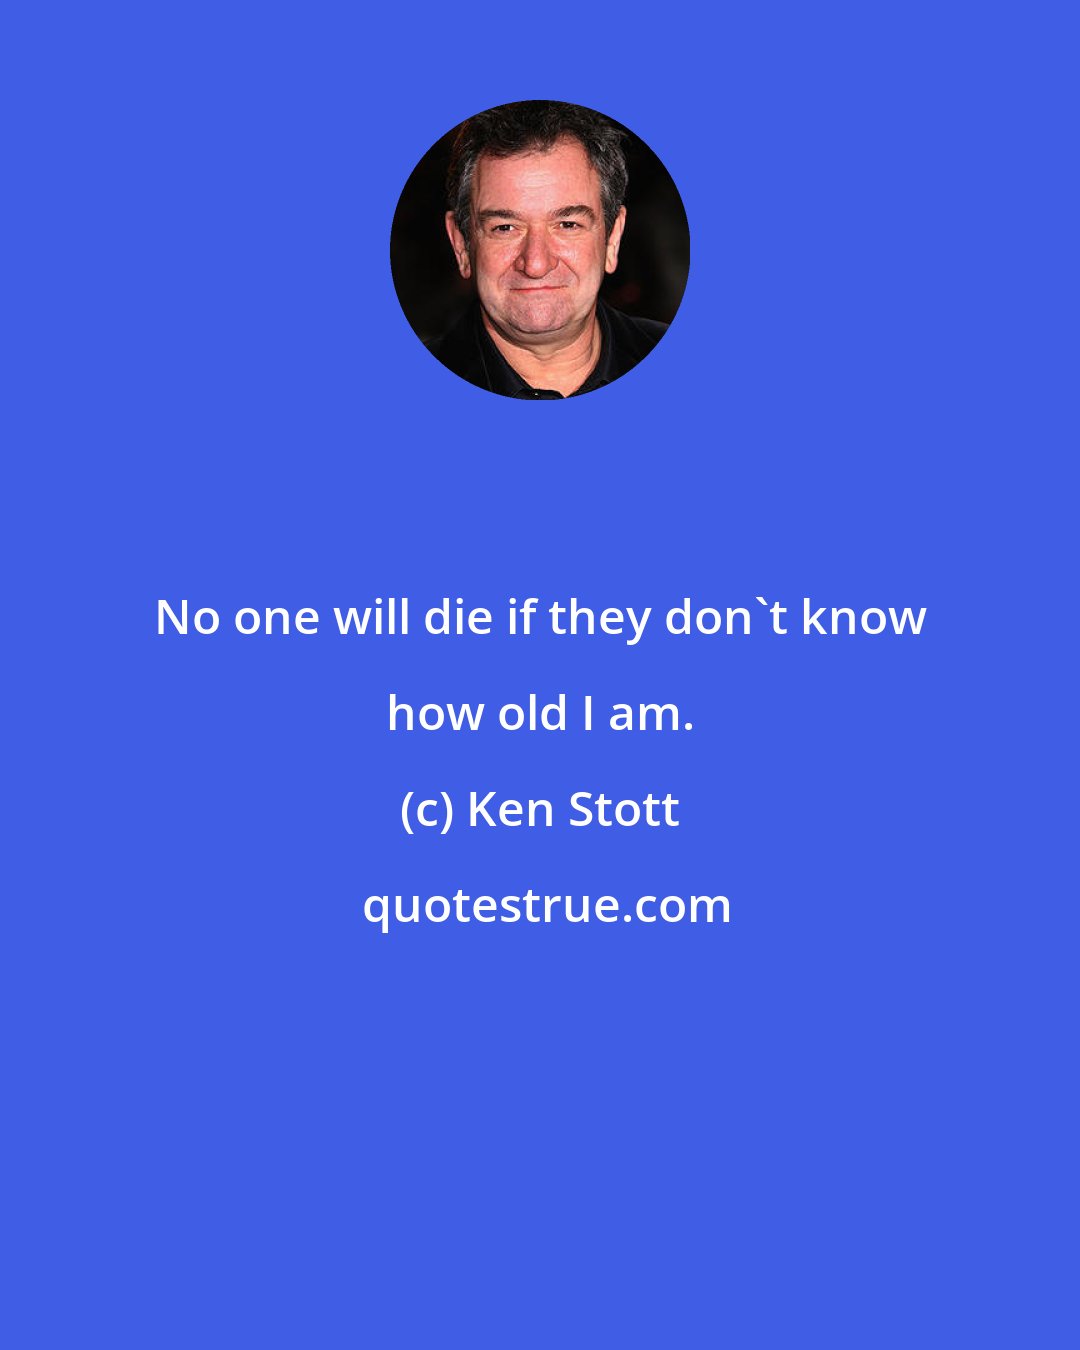 Ken Stott: No one will die if they don't know how old I am.